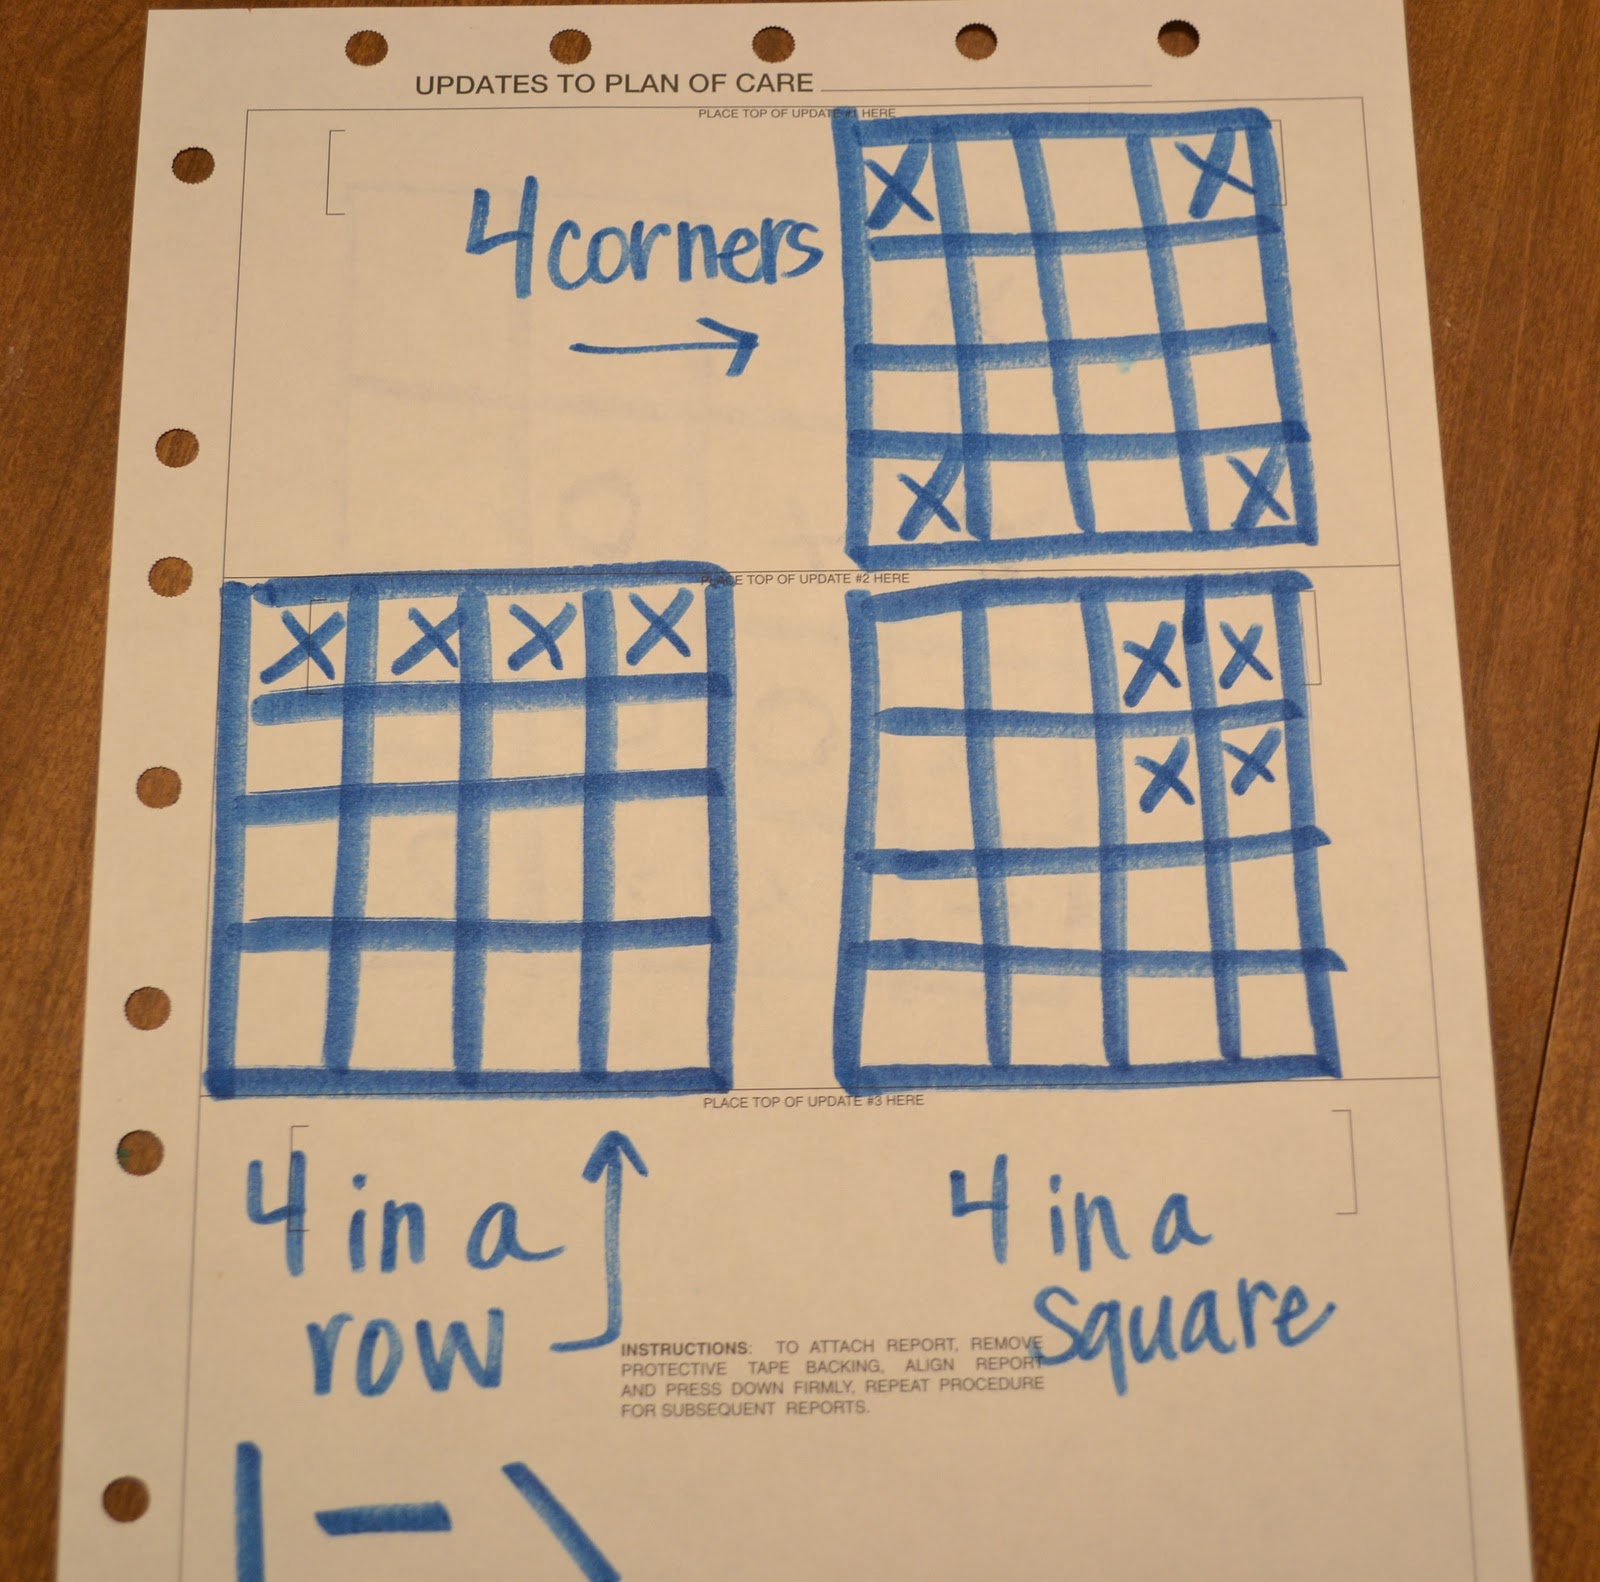 From The Hive: 4 square tic tac toe